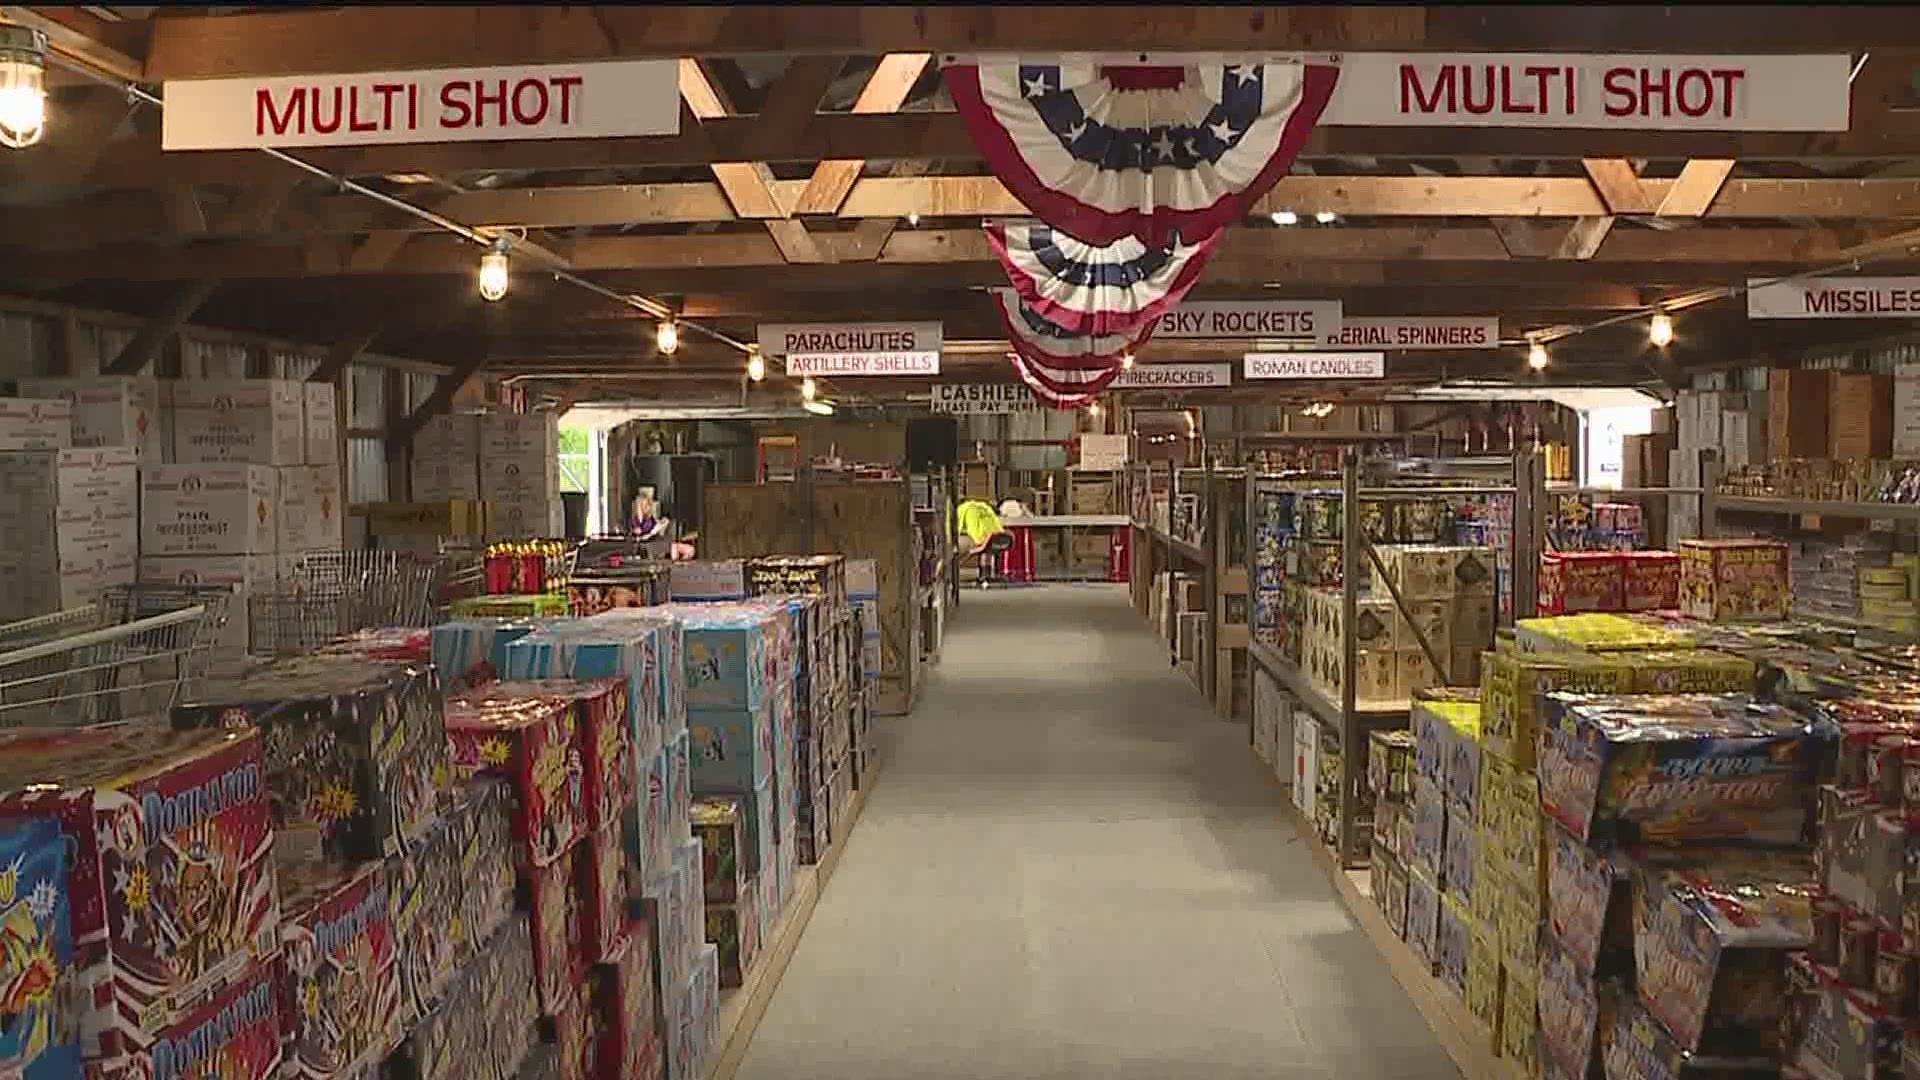 Nostalgia Pyrotechnics in Osco, Illinois says it has lost tens of thousands of dollars in lost business this summer